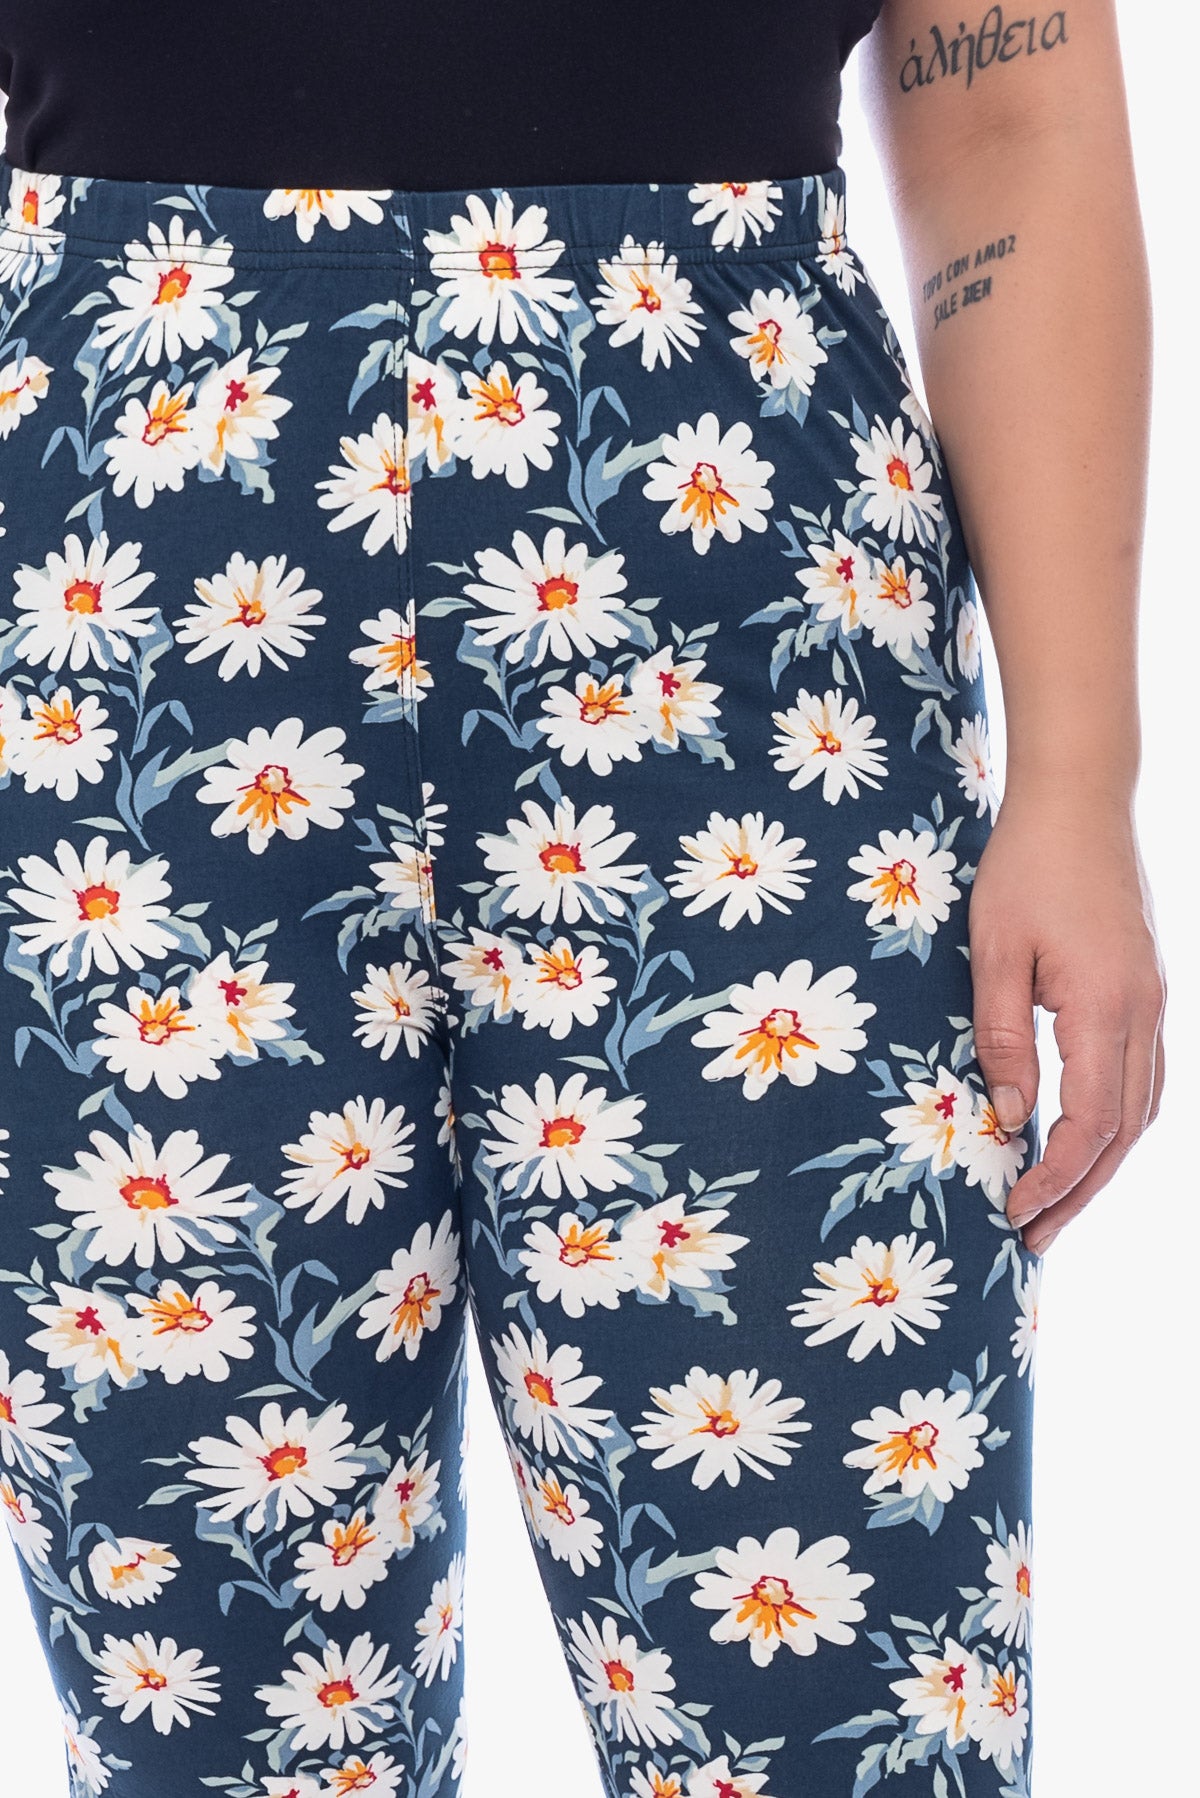 Lilly - daisies